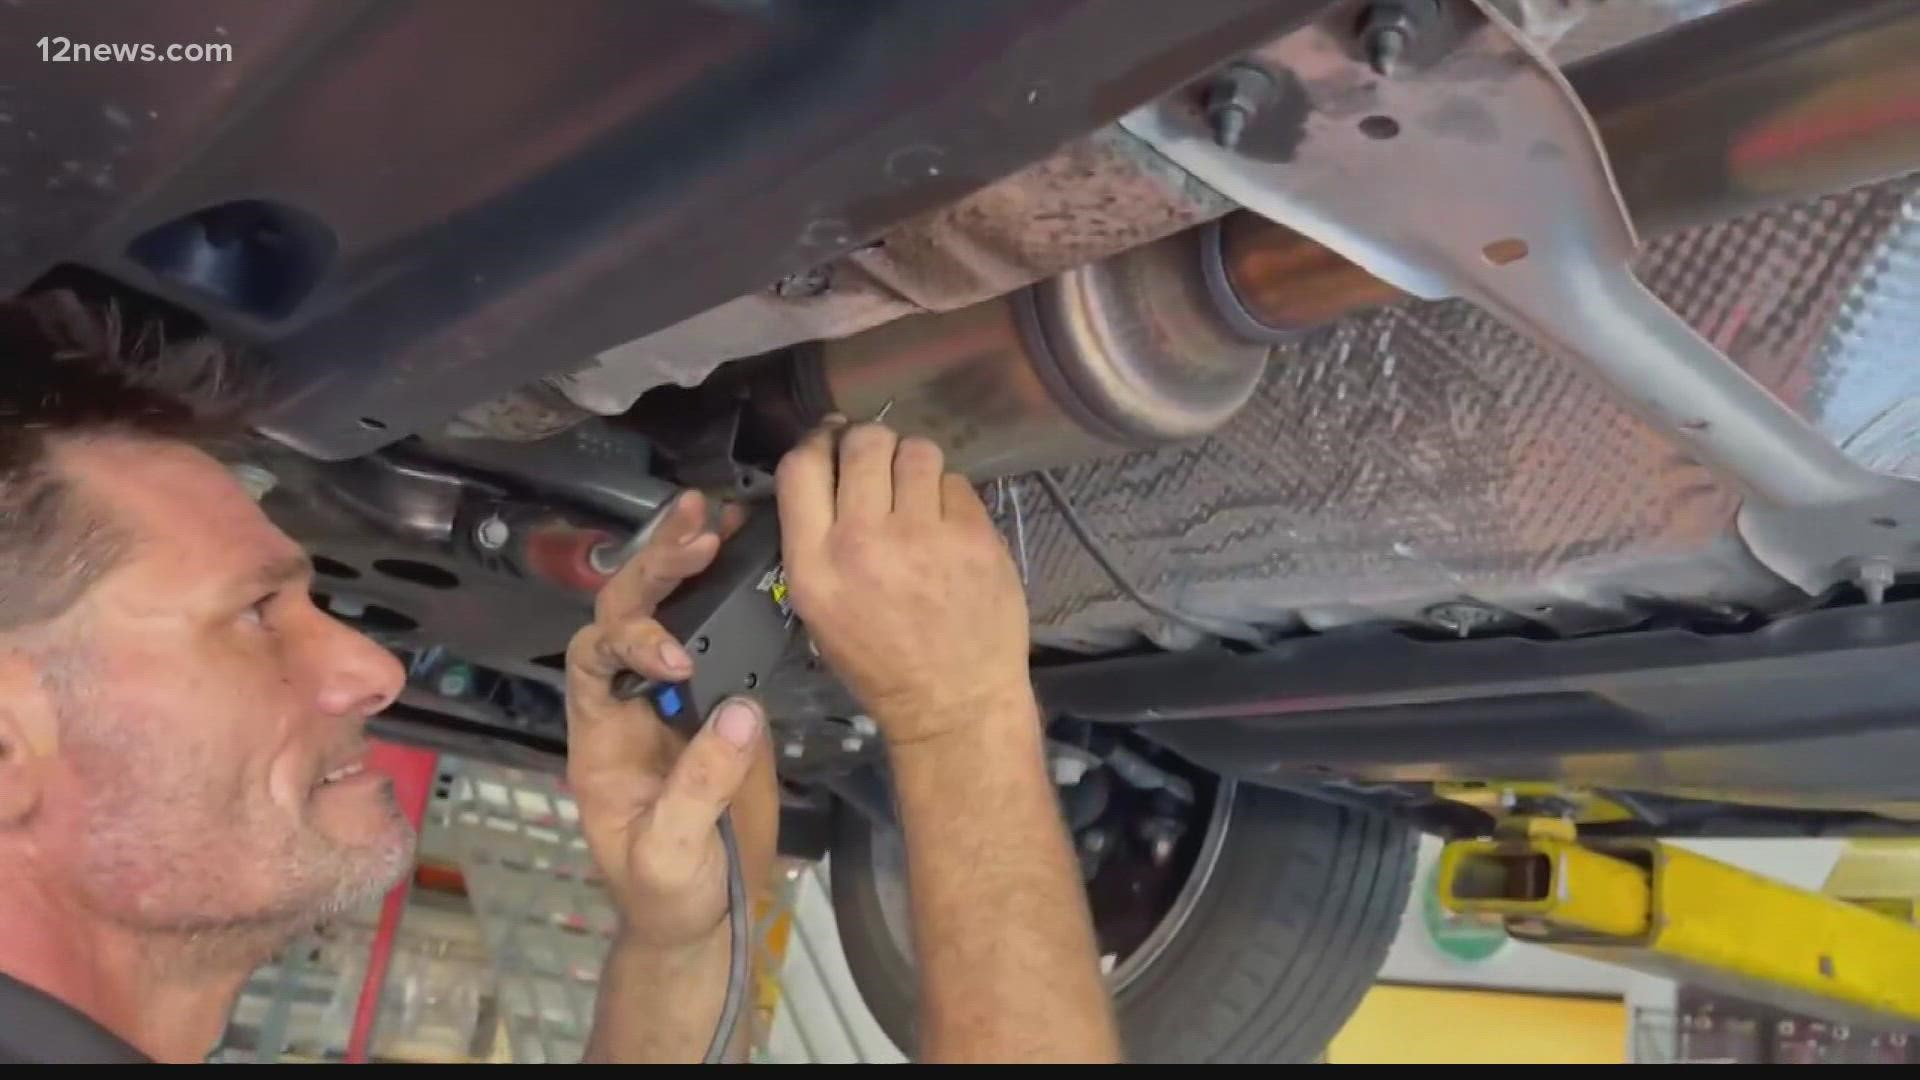 Catalytic converter thefts are up in the Valley. One Midas shop in Mesa is offering to etch your license plate number into your converter to prevent thefts.